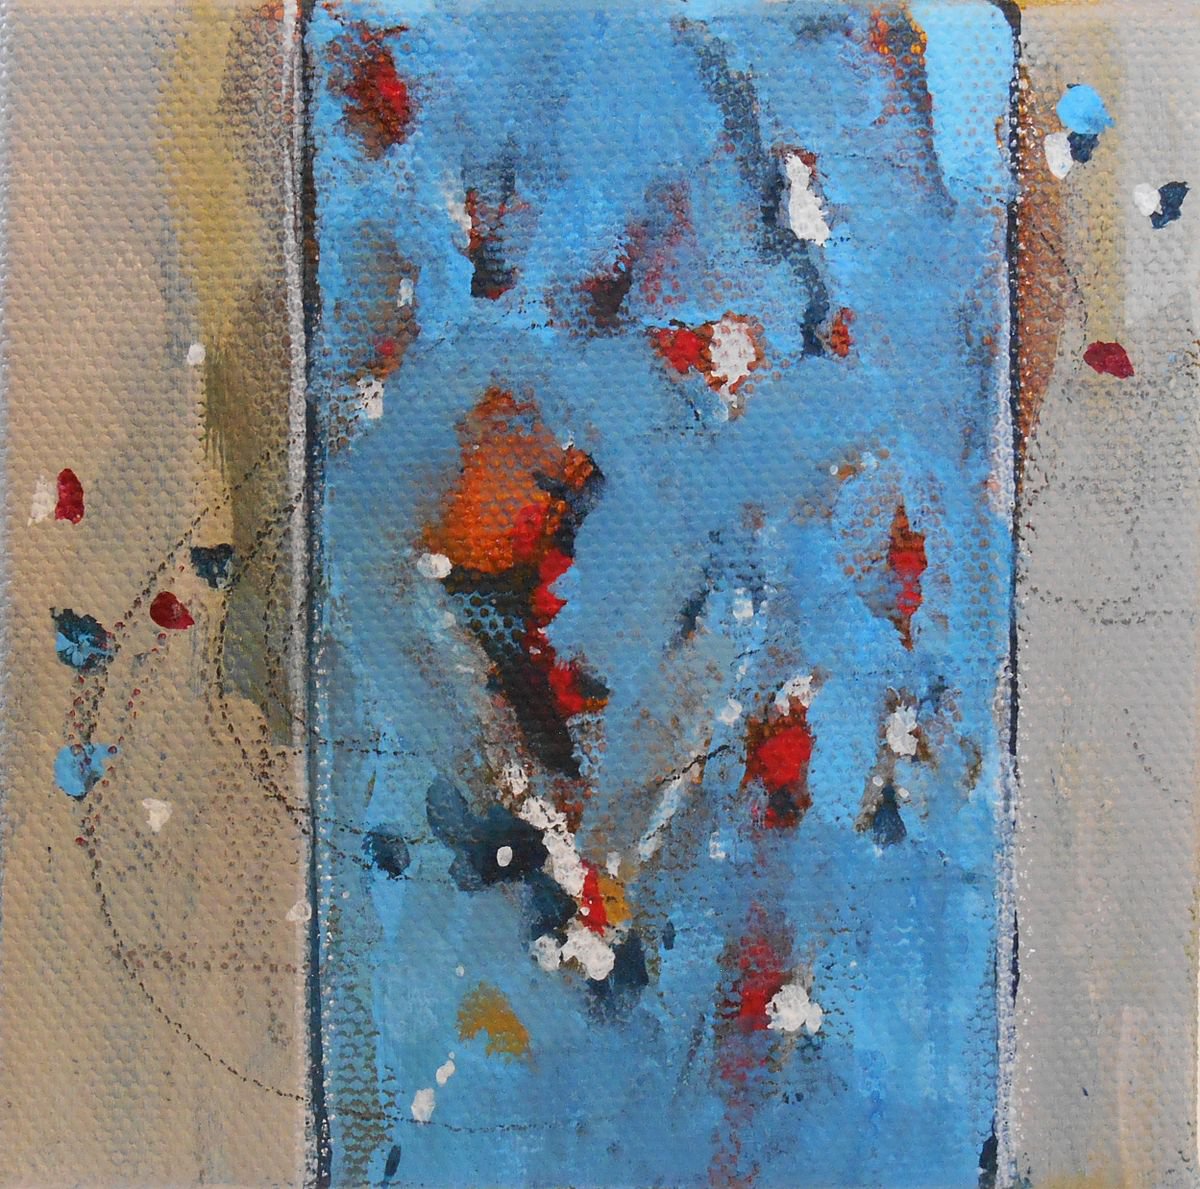 Alive - Abstract Art - 4 x 4 IN / 10 x 10 CM - Mini Abstract Oil Painting on Canvas, Ready... by Cynthia Ligeros Abstract Artist